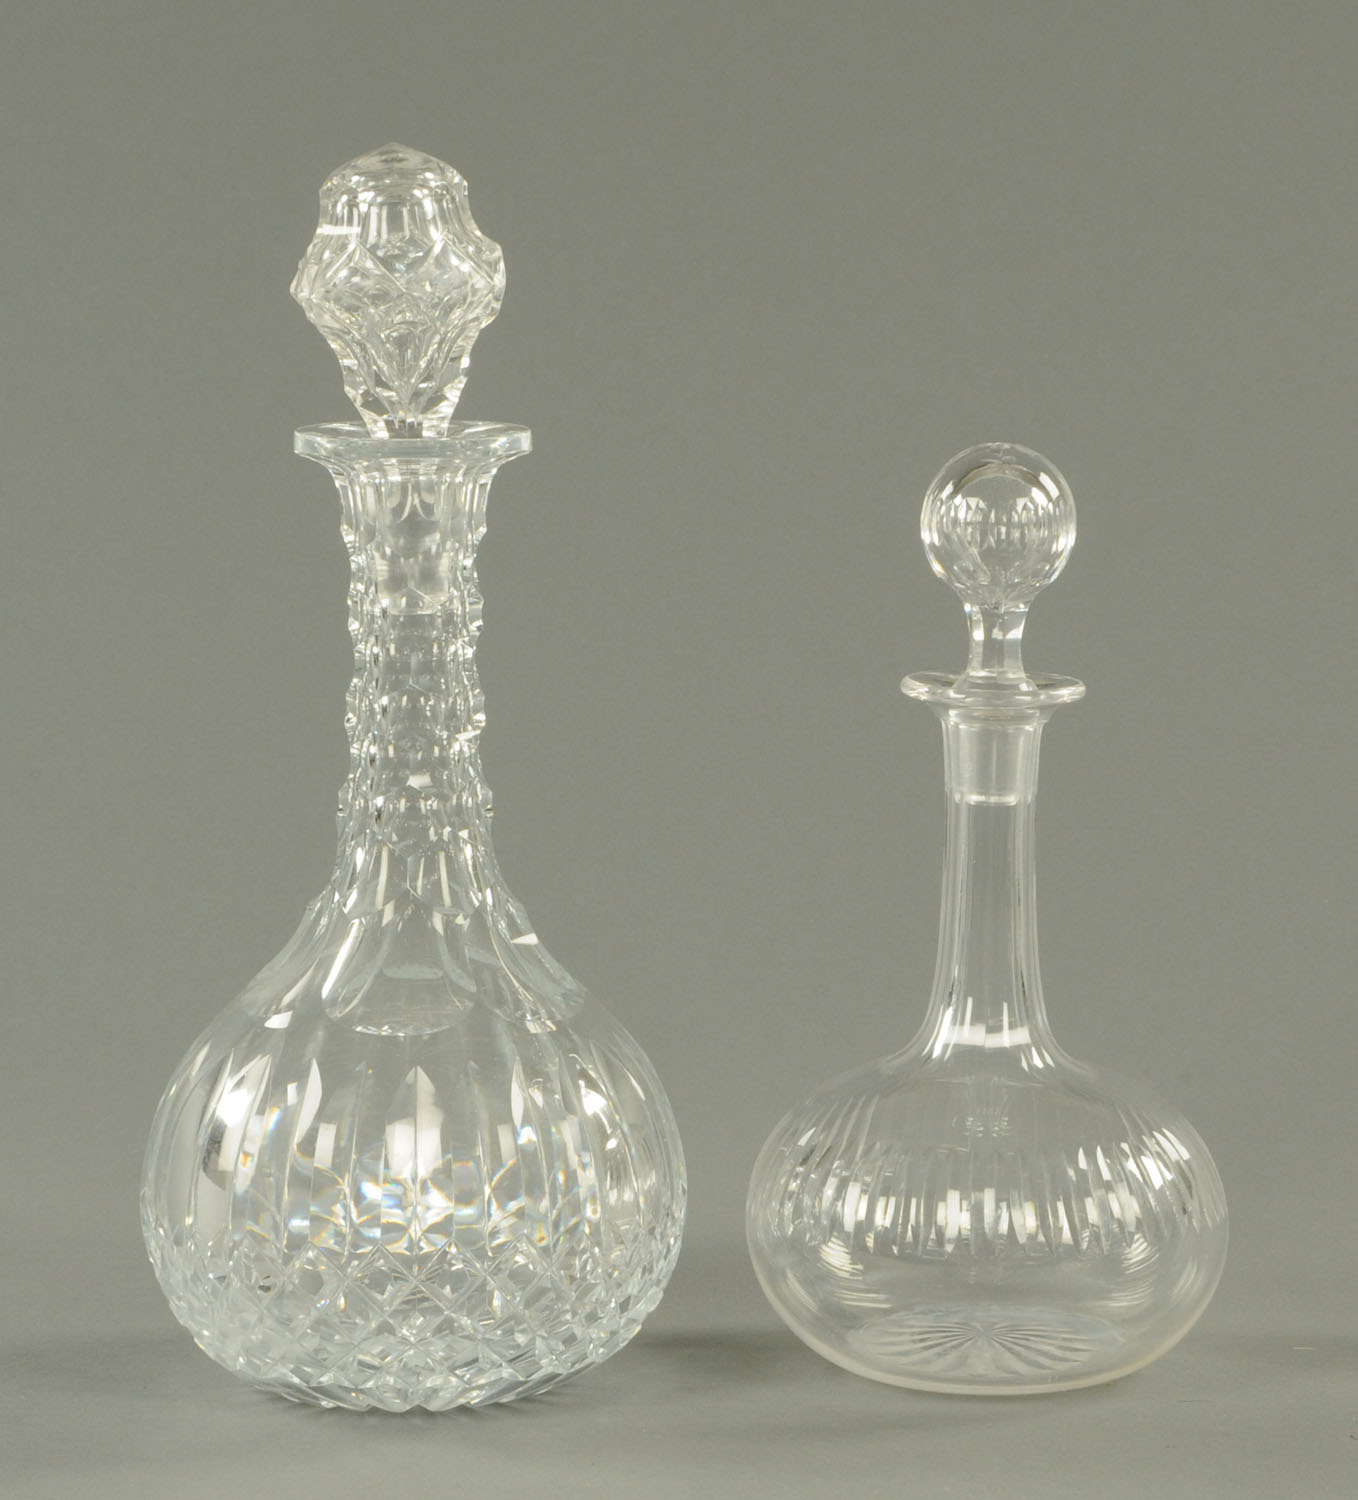 Two decanters, one Victorian one Edwardian.